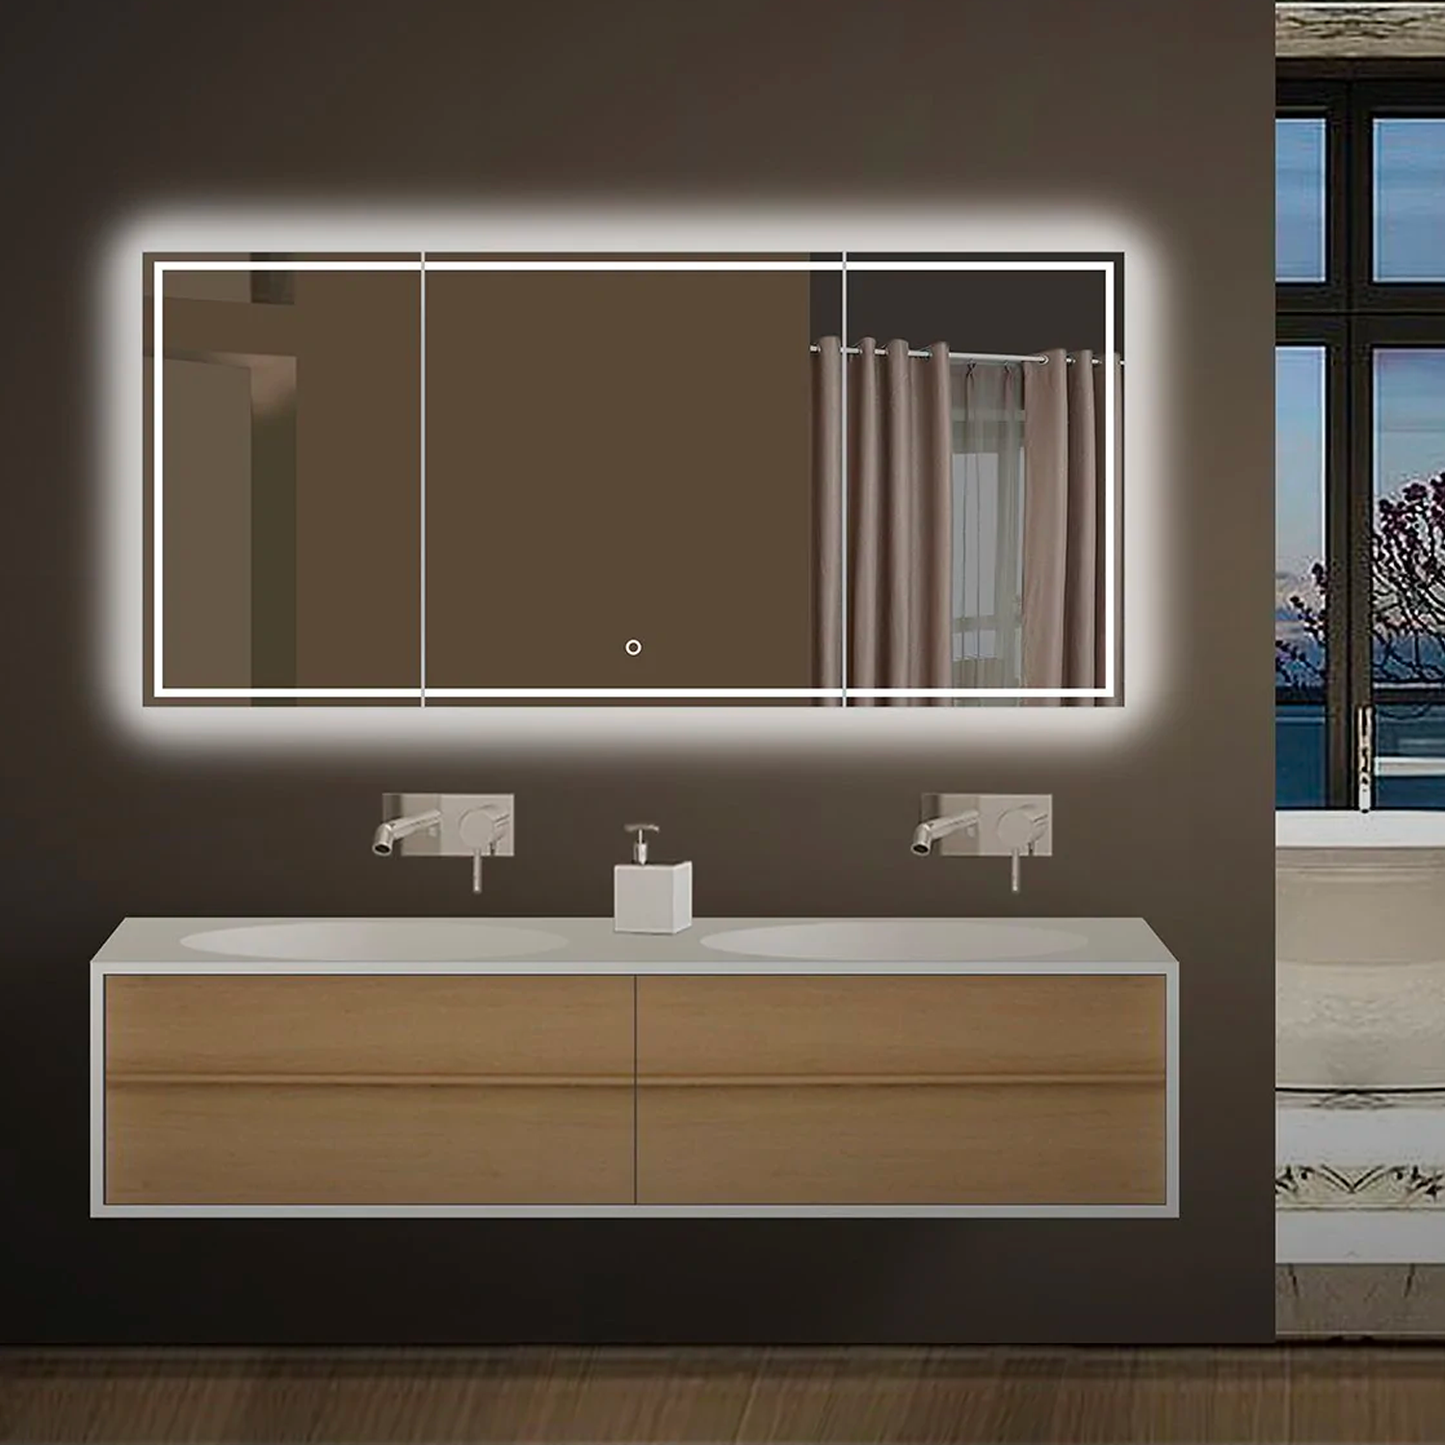 55.1 in. X 25.6 in. Backlit/Frontlit LED Lighted Bathroom Vanity Mirror with Pivoting Side Mirrors, Thin Plexiglass Edge, Anti Fog, Adjustable Color Temperature & Remembrance, Makeup Mirror, Touch Button, Titan Style